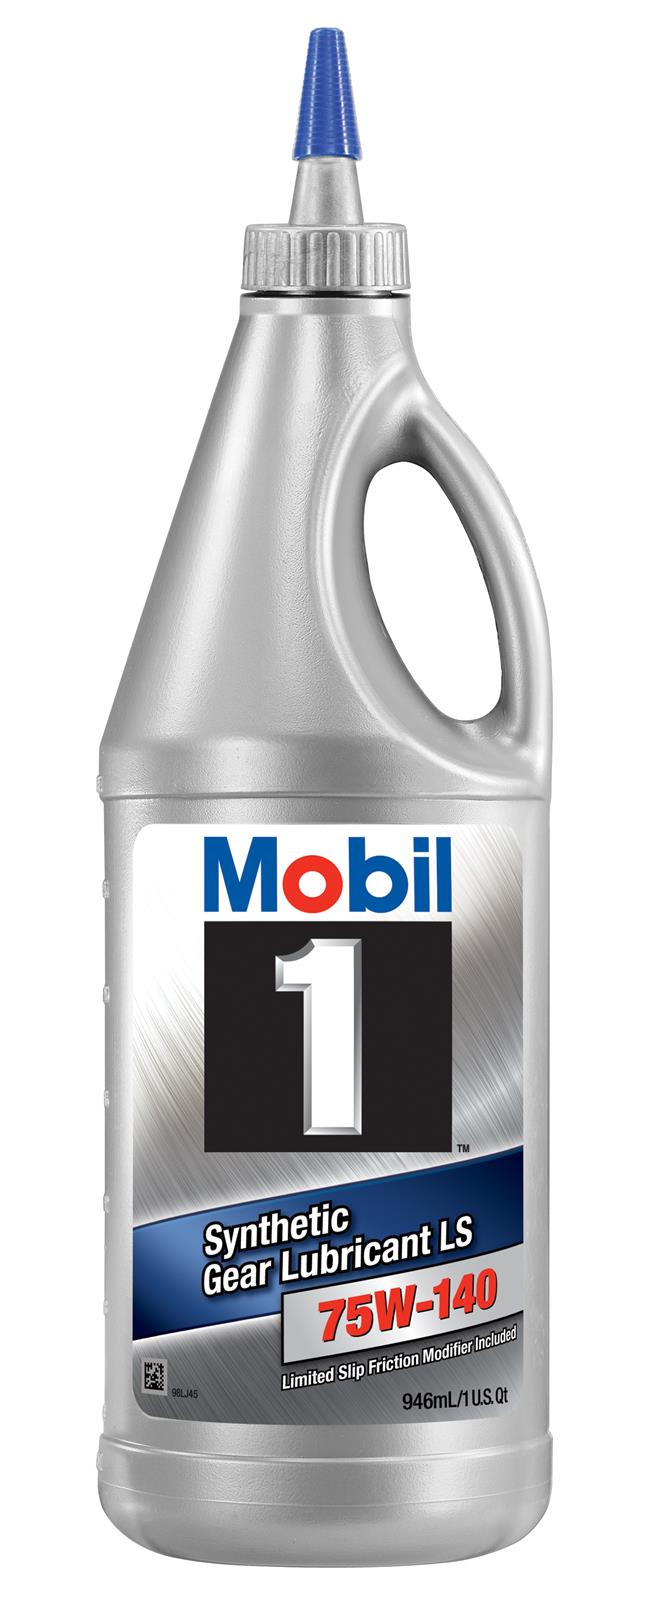 Mobil 102490 Mobil 1 Synthetic Gear Lubricant LS | Summit Racing